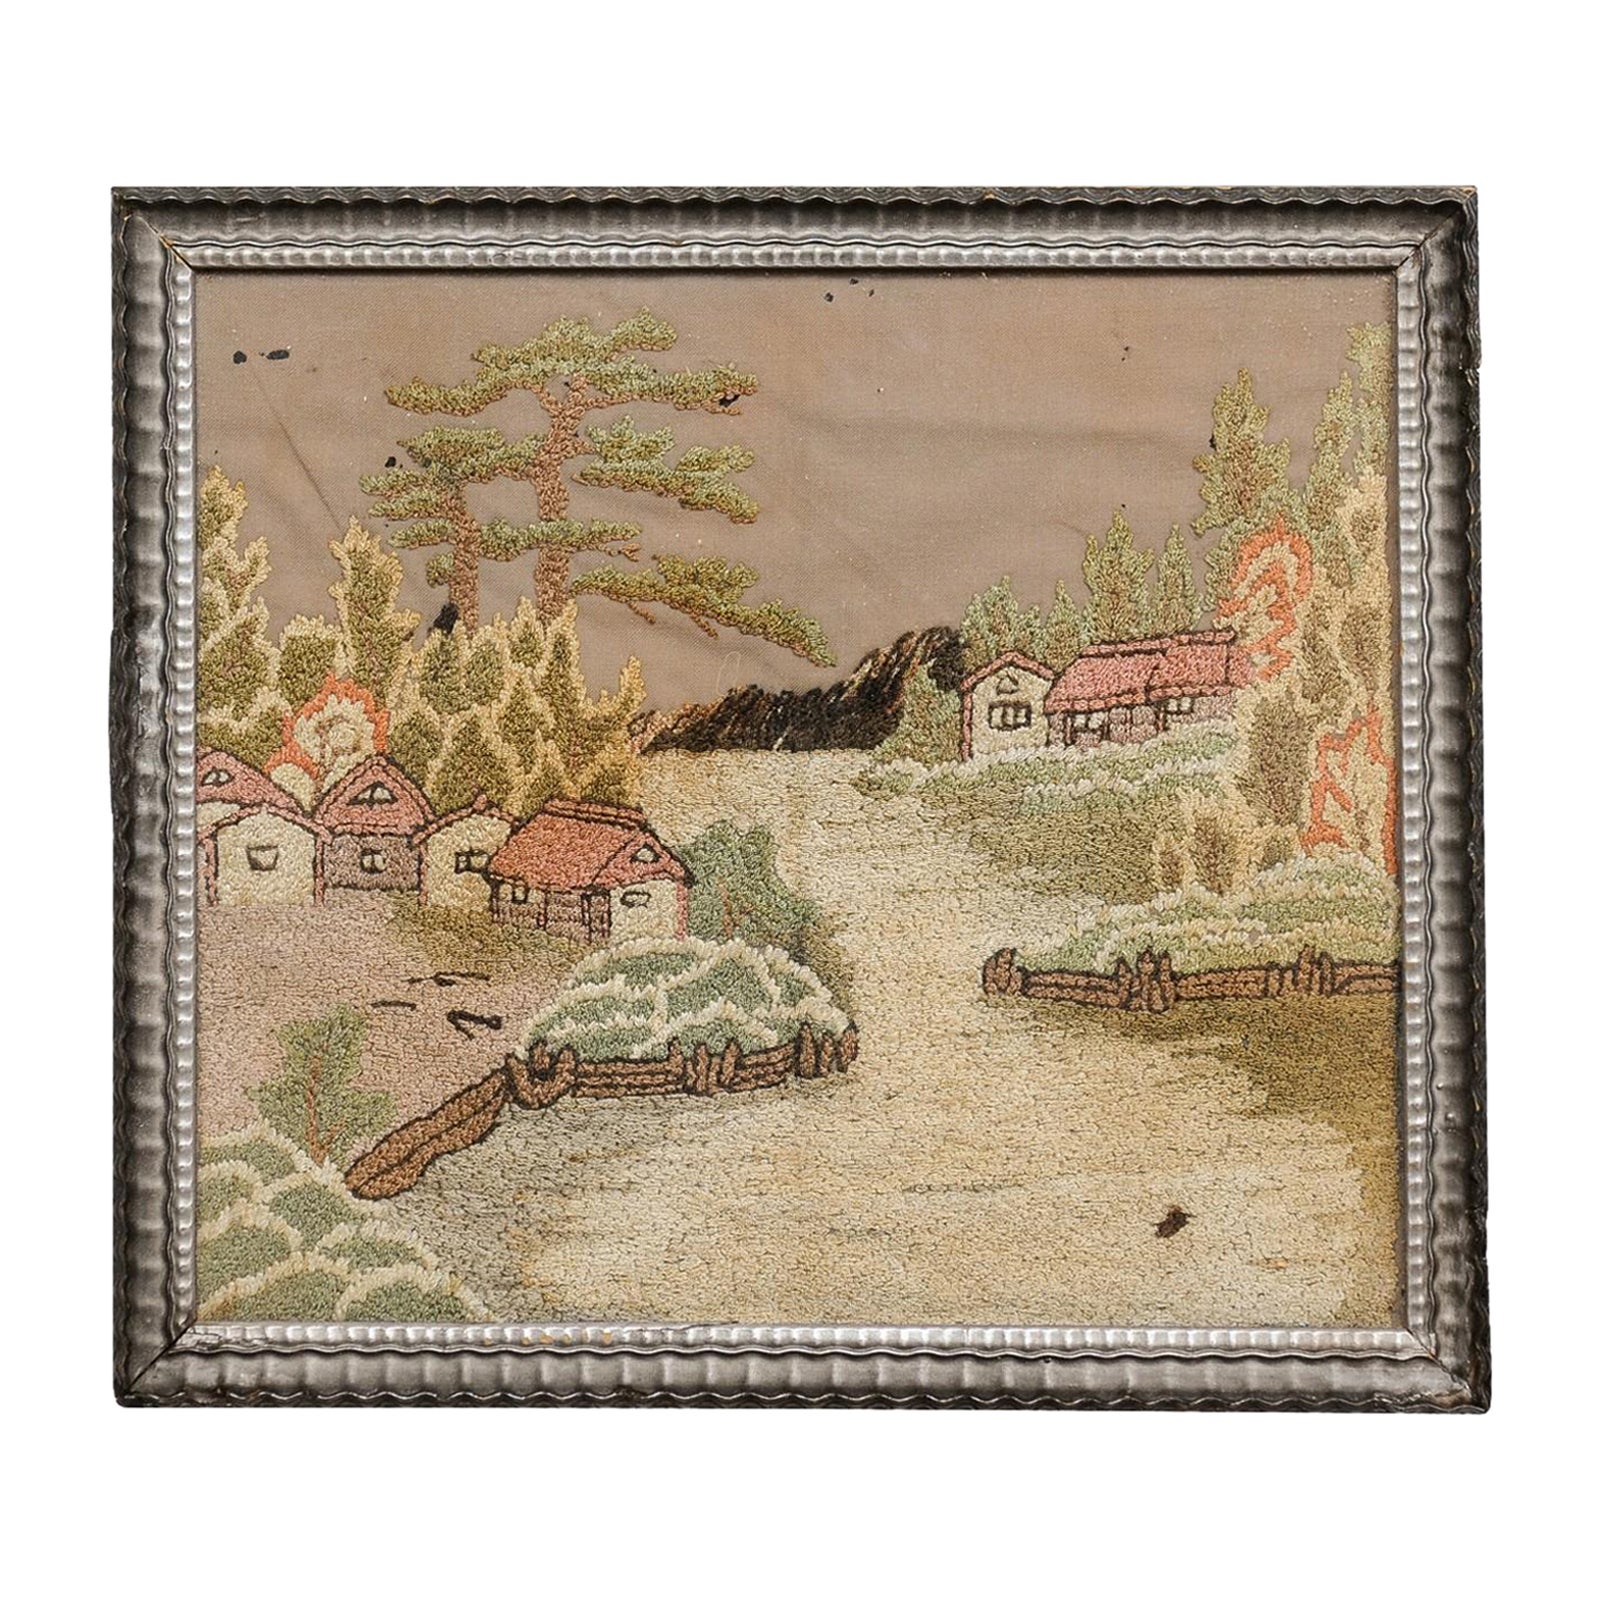  Framed 19th Century English Embroidery of a Country Landscape For Sale